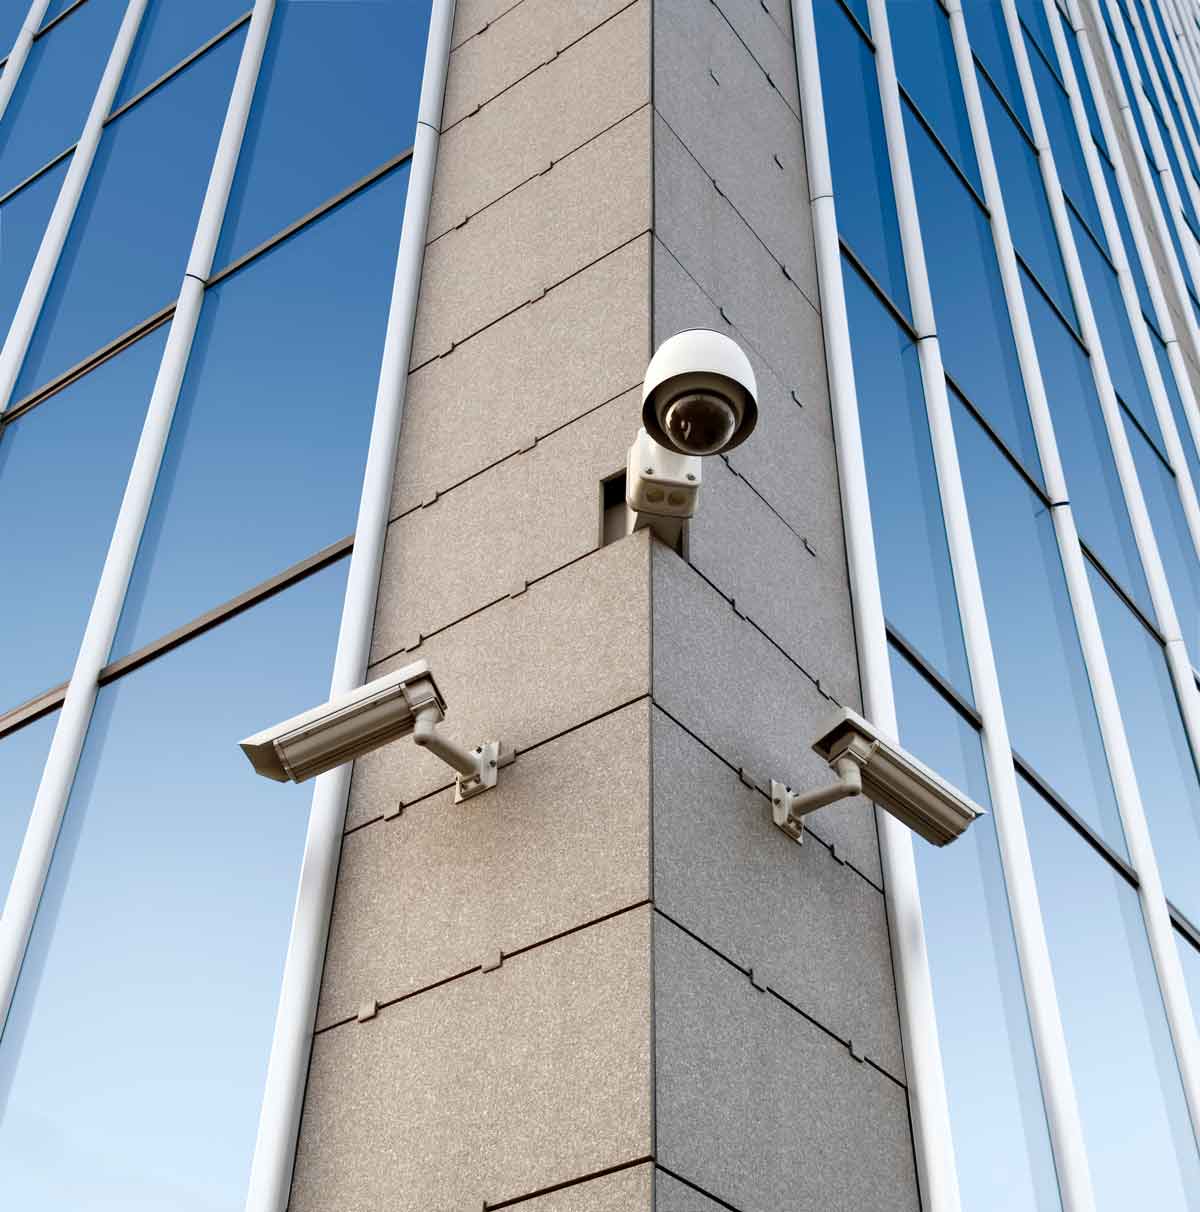 Security/Surveillance Cameras Mounted on Exterior of Building